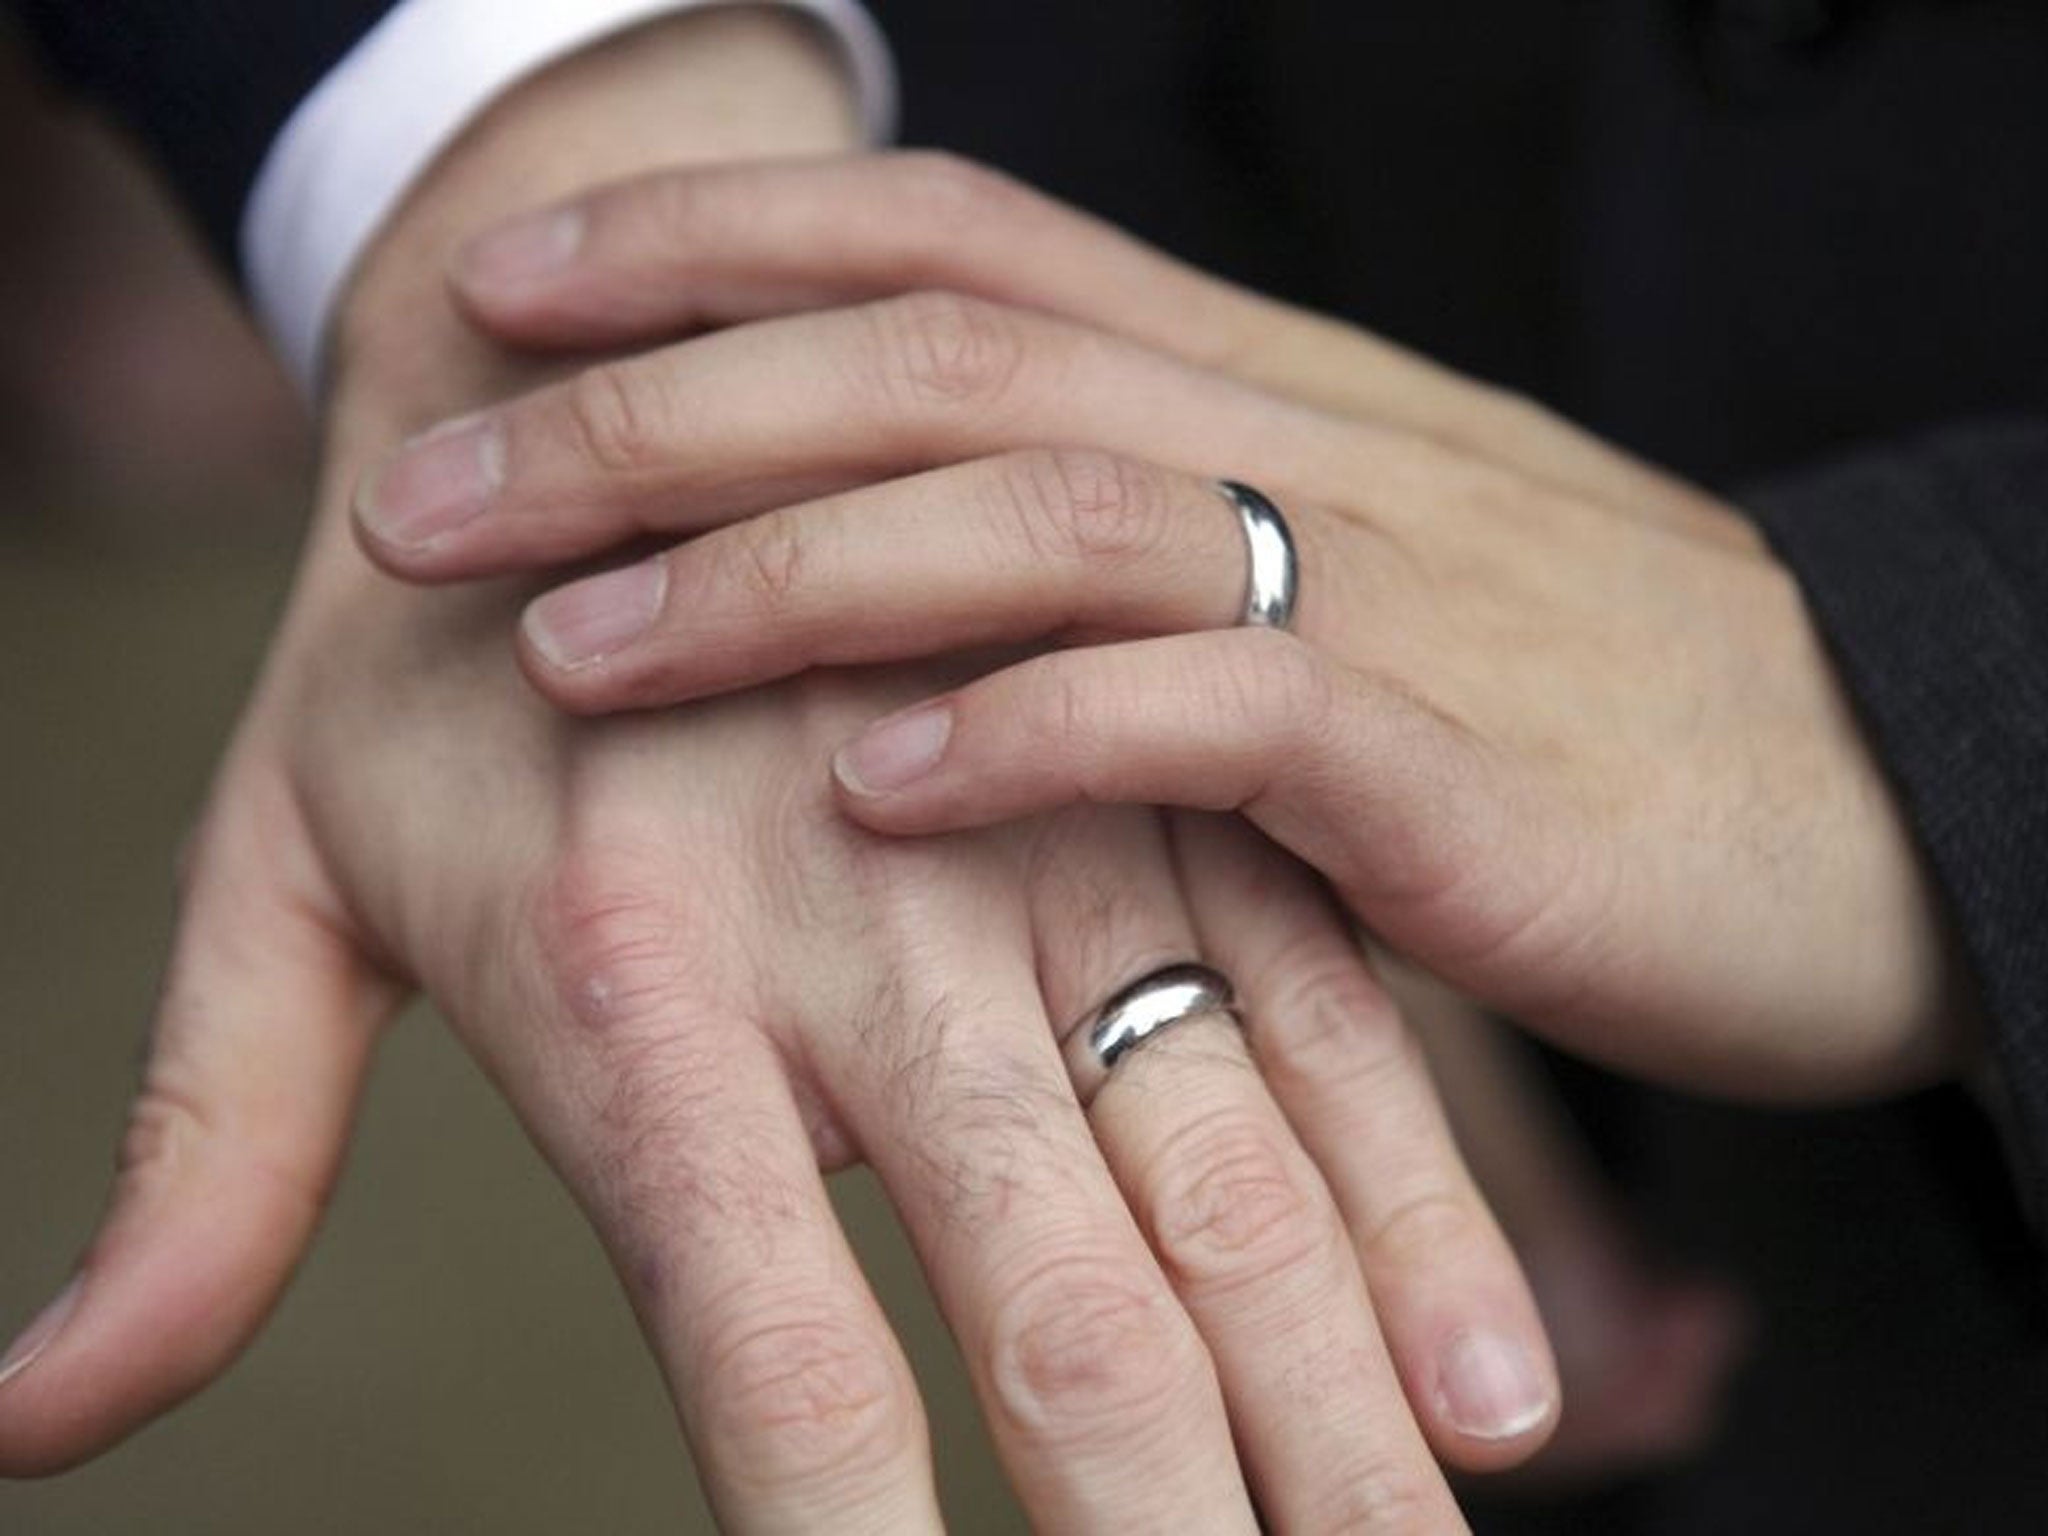 A same-sex couple show their rings after getting married.